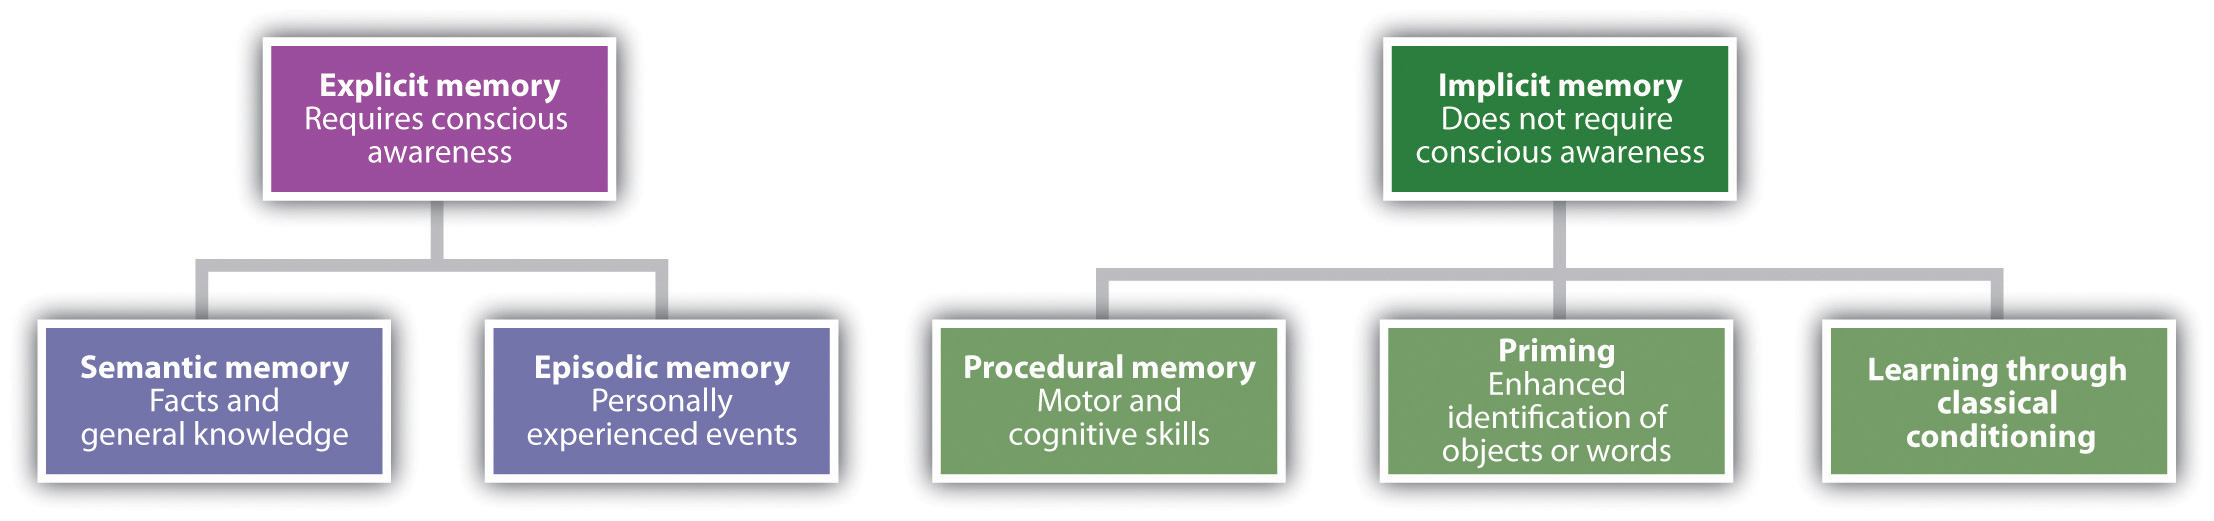 difference between eidetic memory and photographic memory